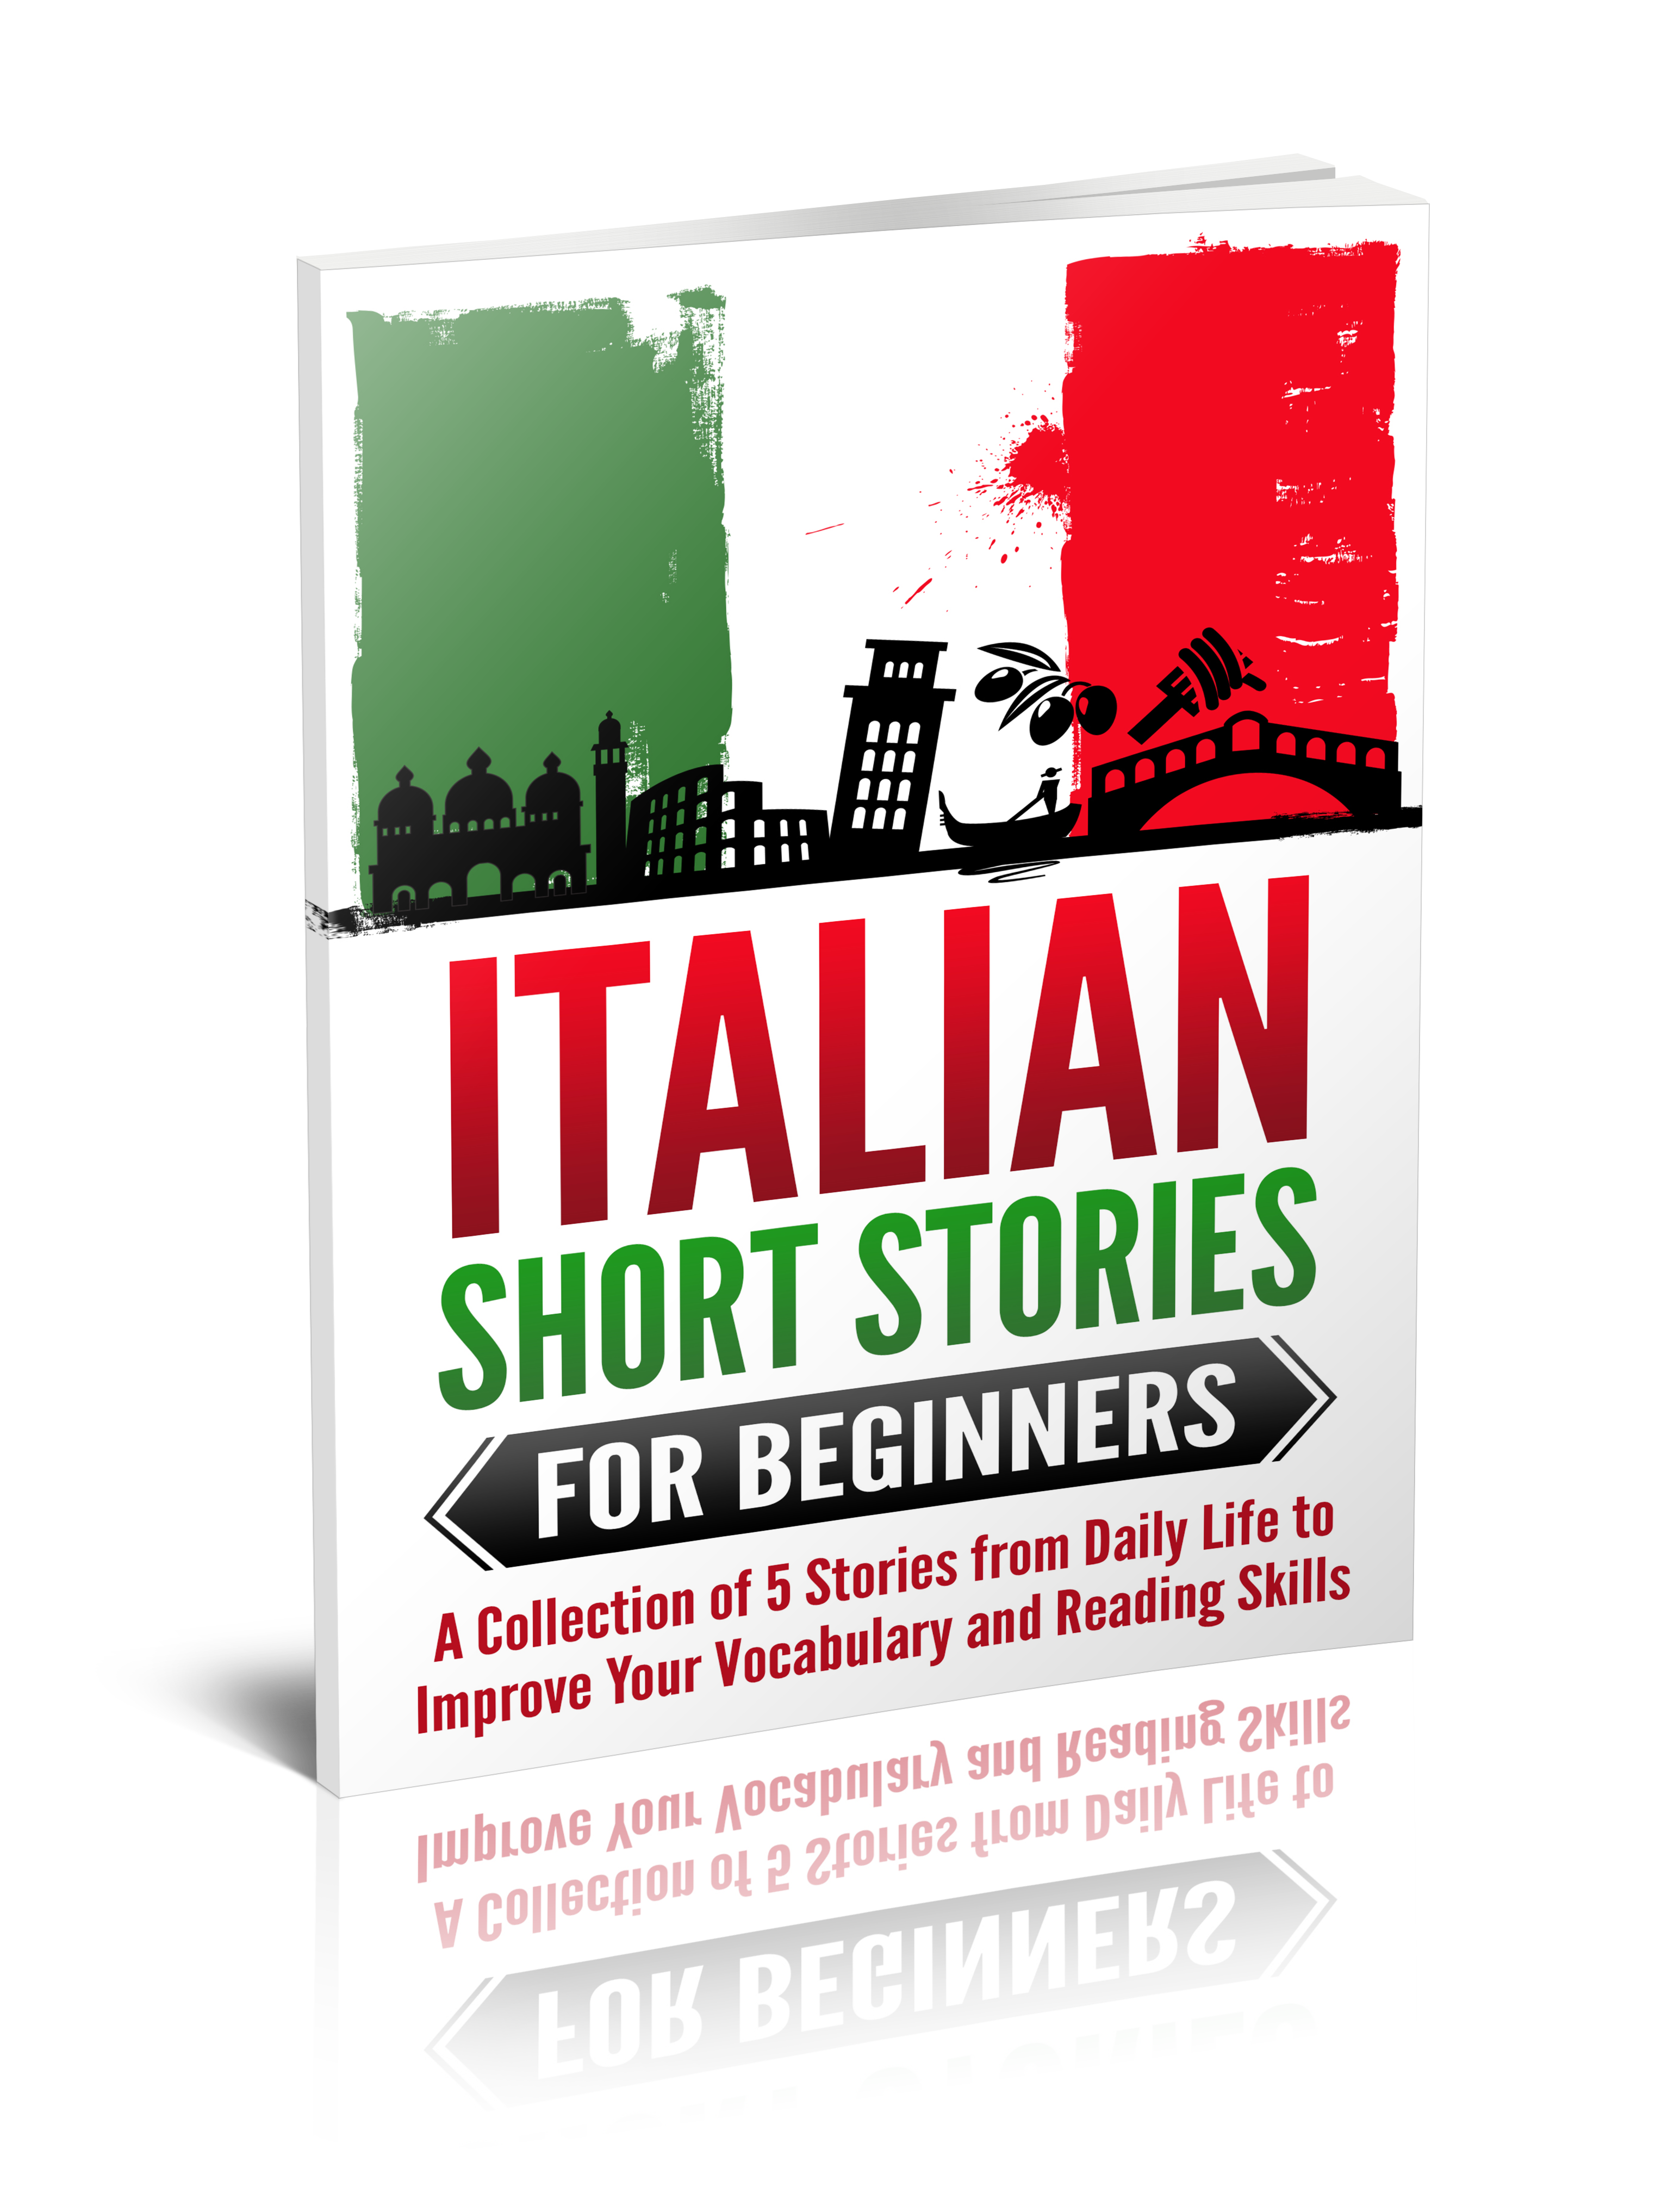 FREE: Italian Short Stories for Beginners – A Collection of 5 Stories to Improve Your Vocabulary and Reading Skills by Maria Da Genova